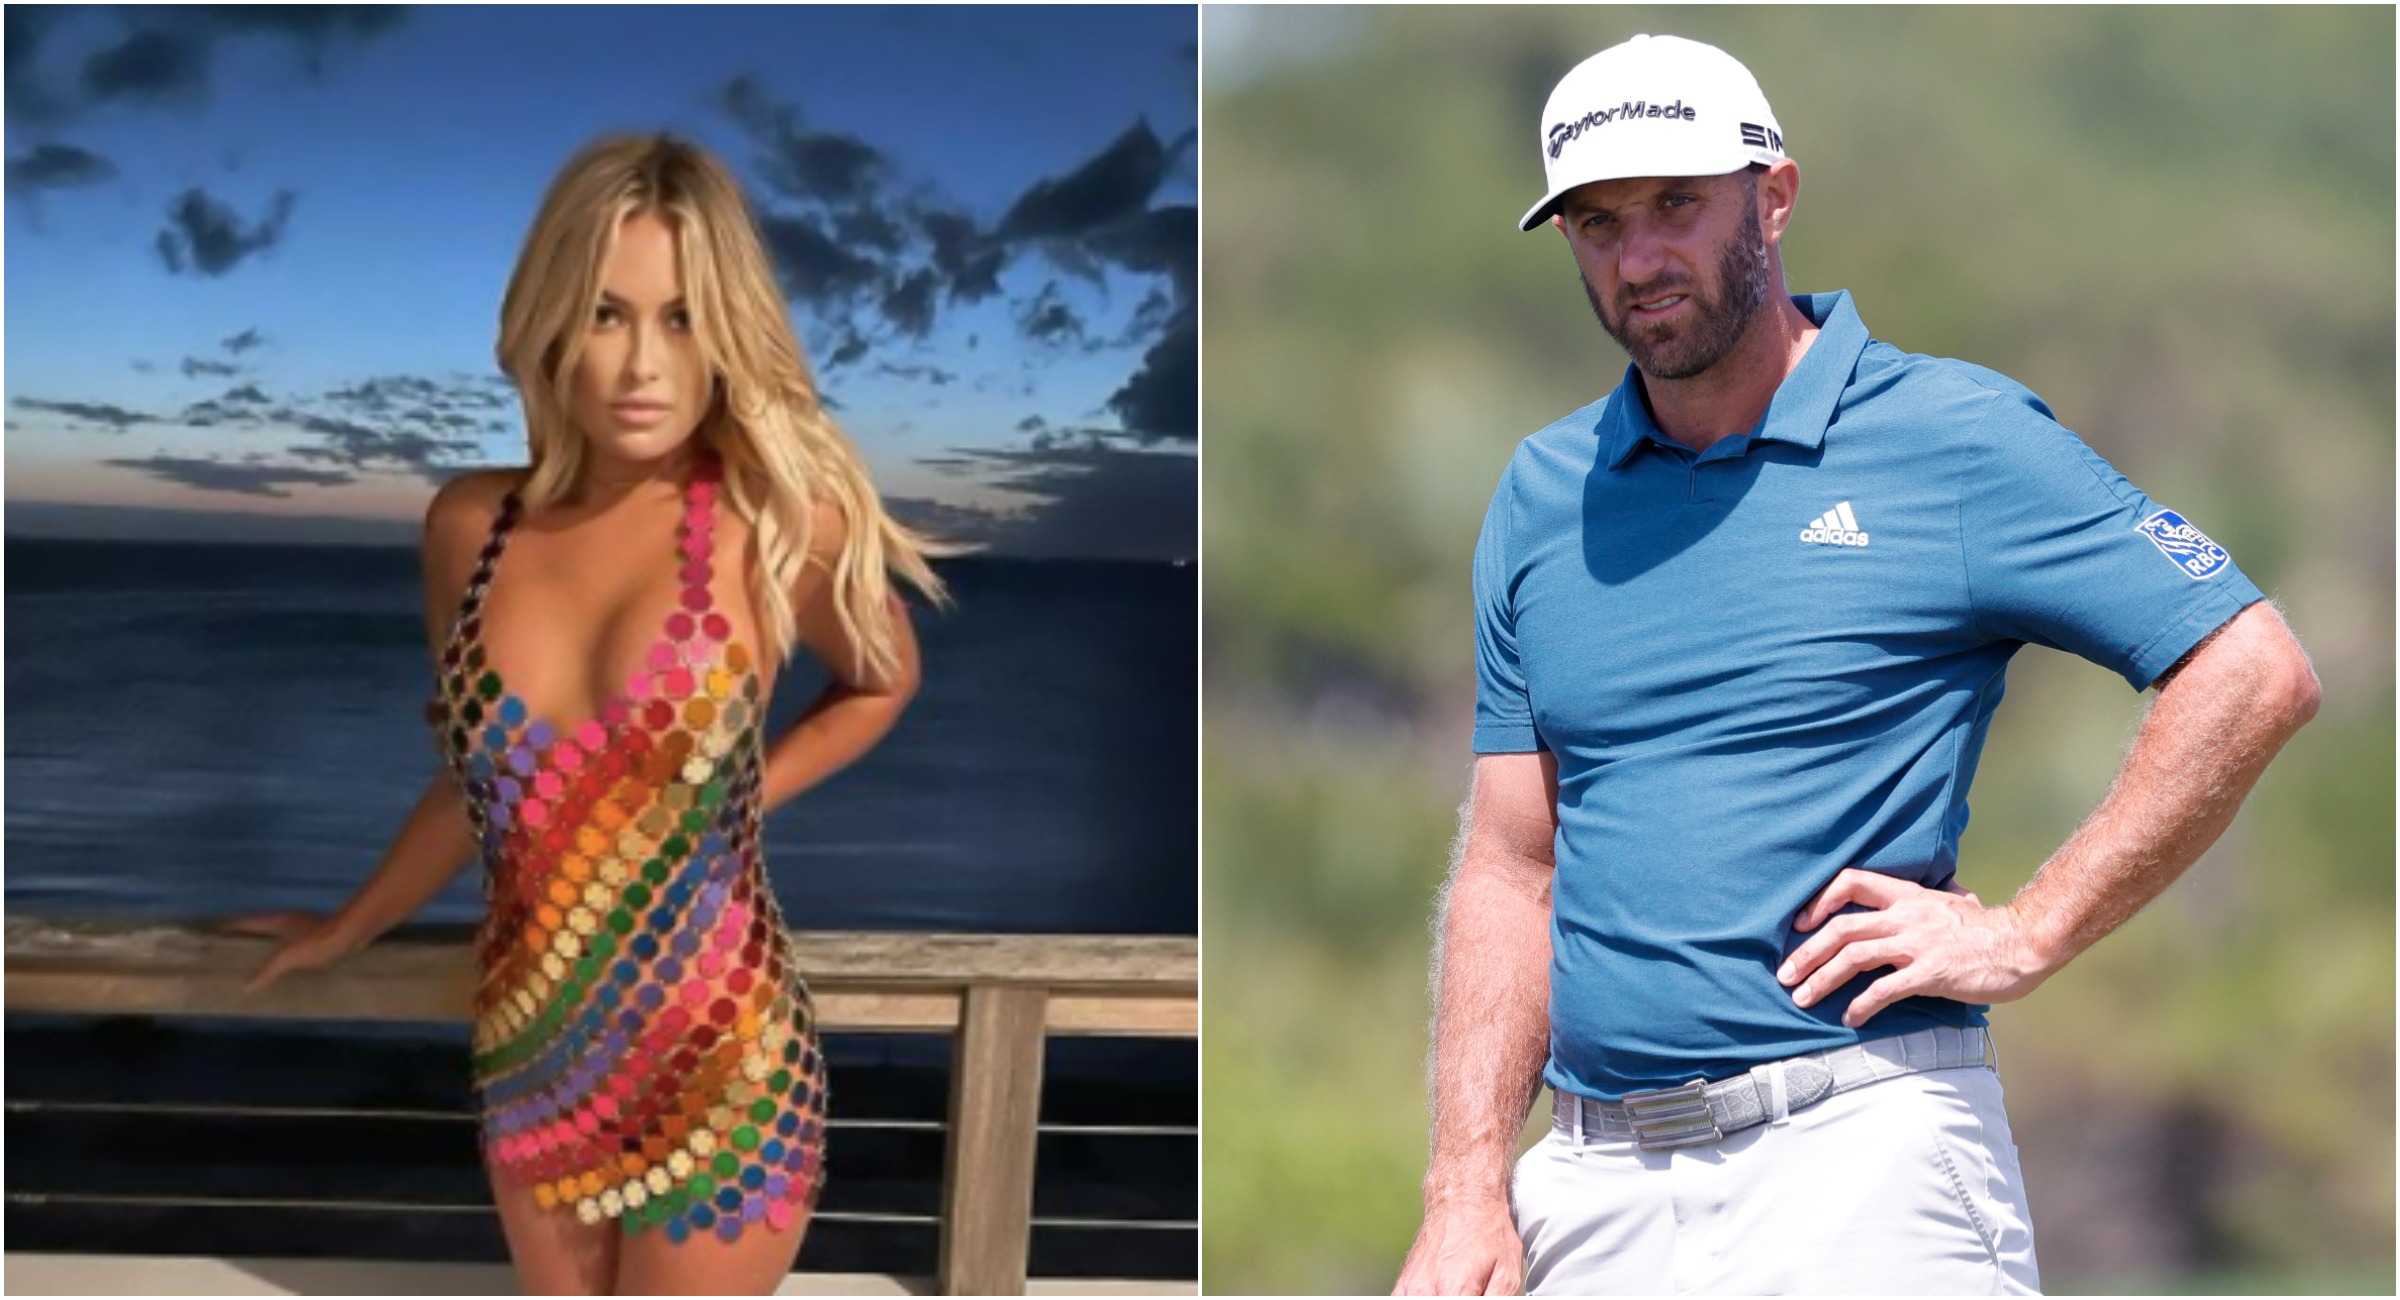 Paulina Gretzky: "Dustin Johnson told me ABSOLUTELY NOT to Playboy...